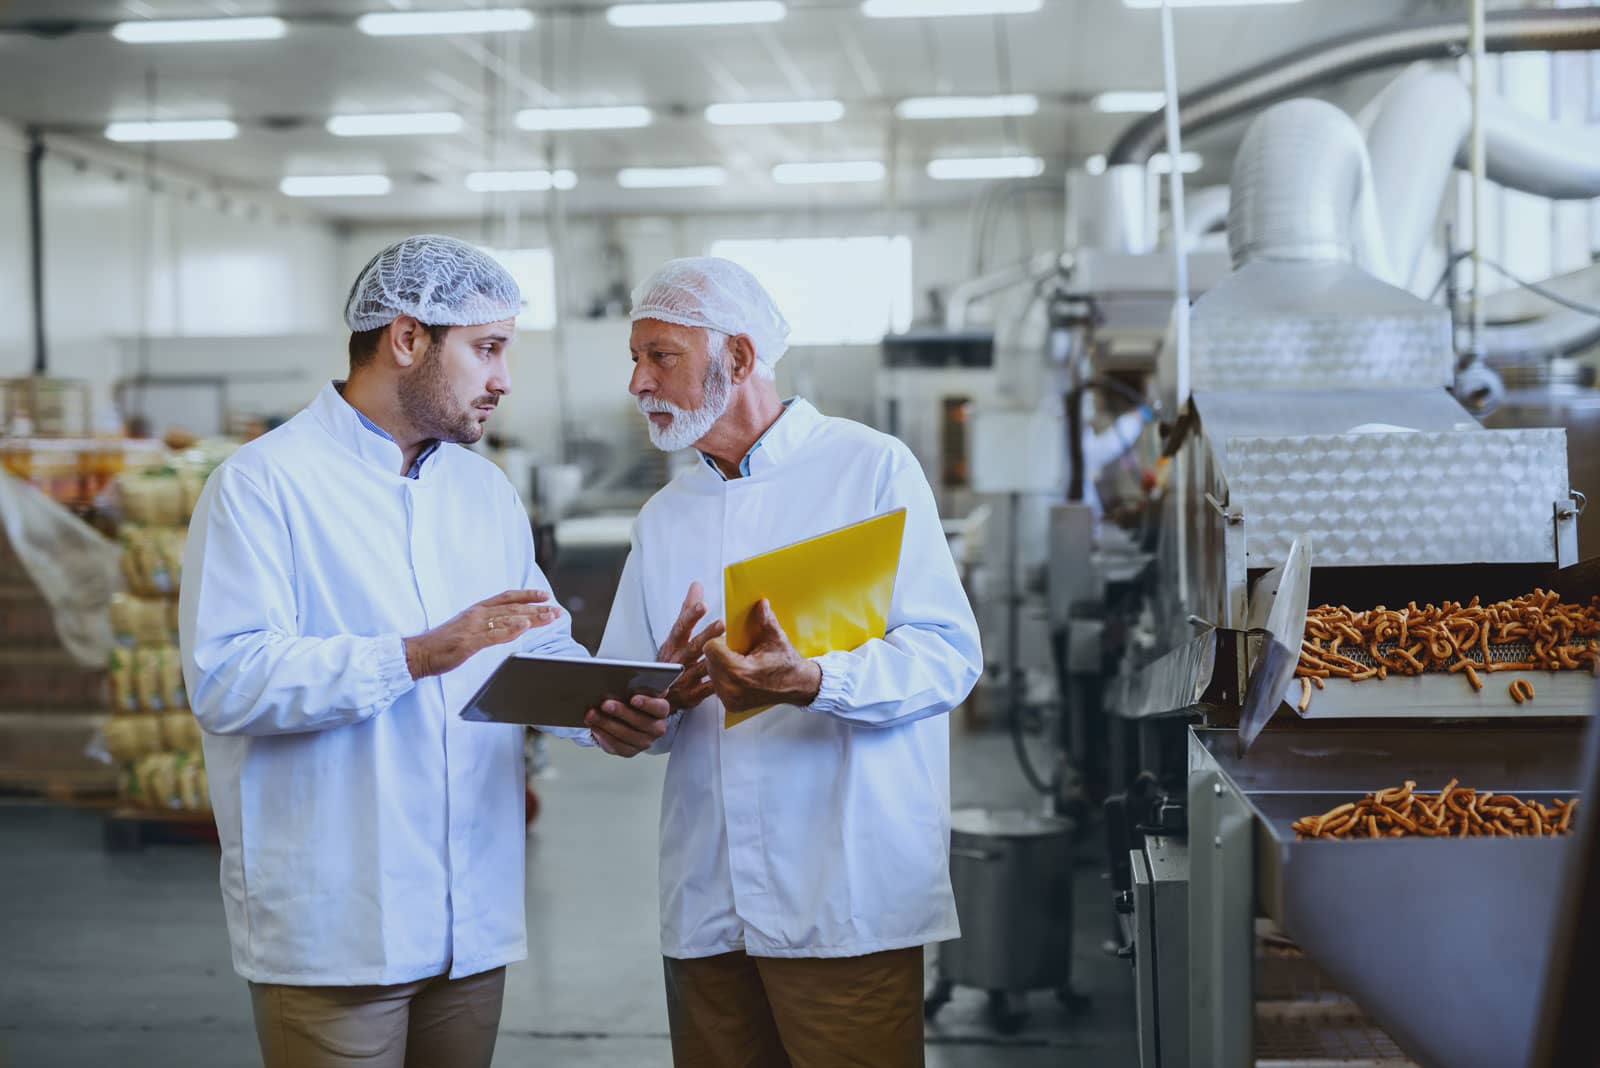 Two men in a food processing plant discussing operations next to a machine producing french fries